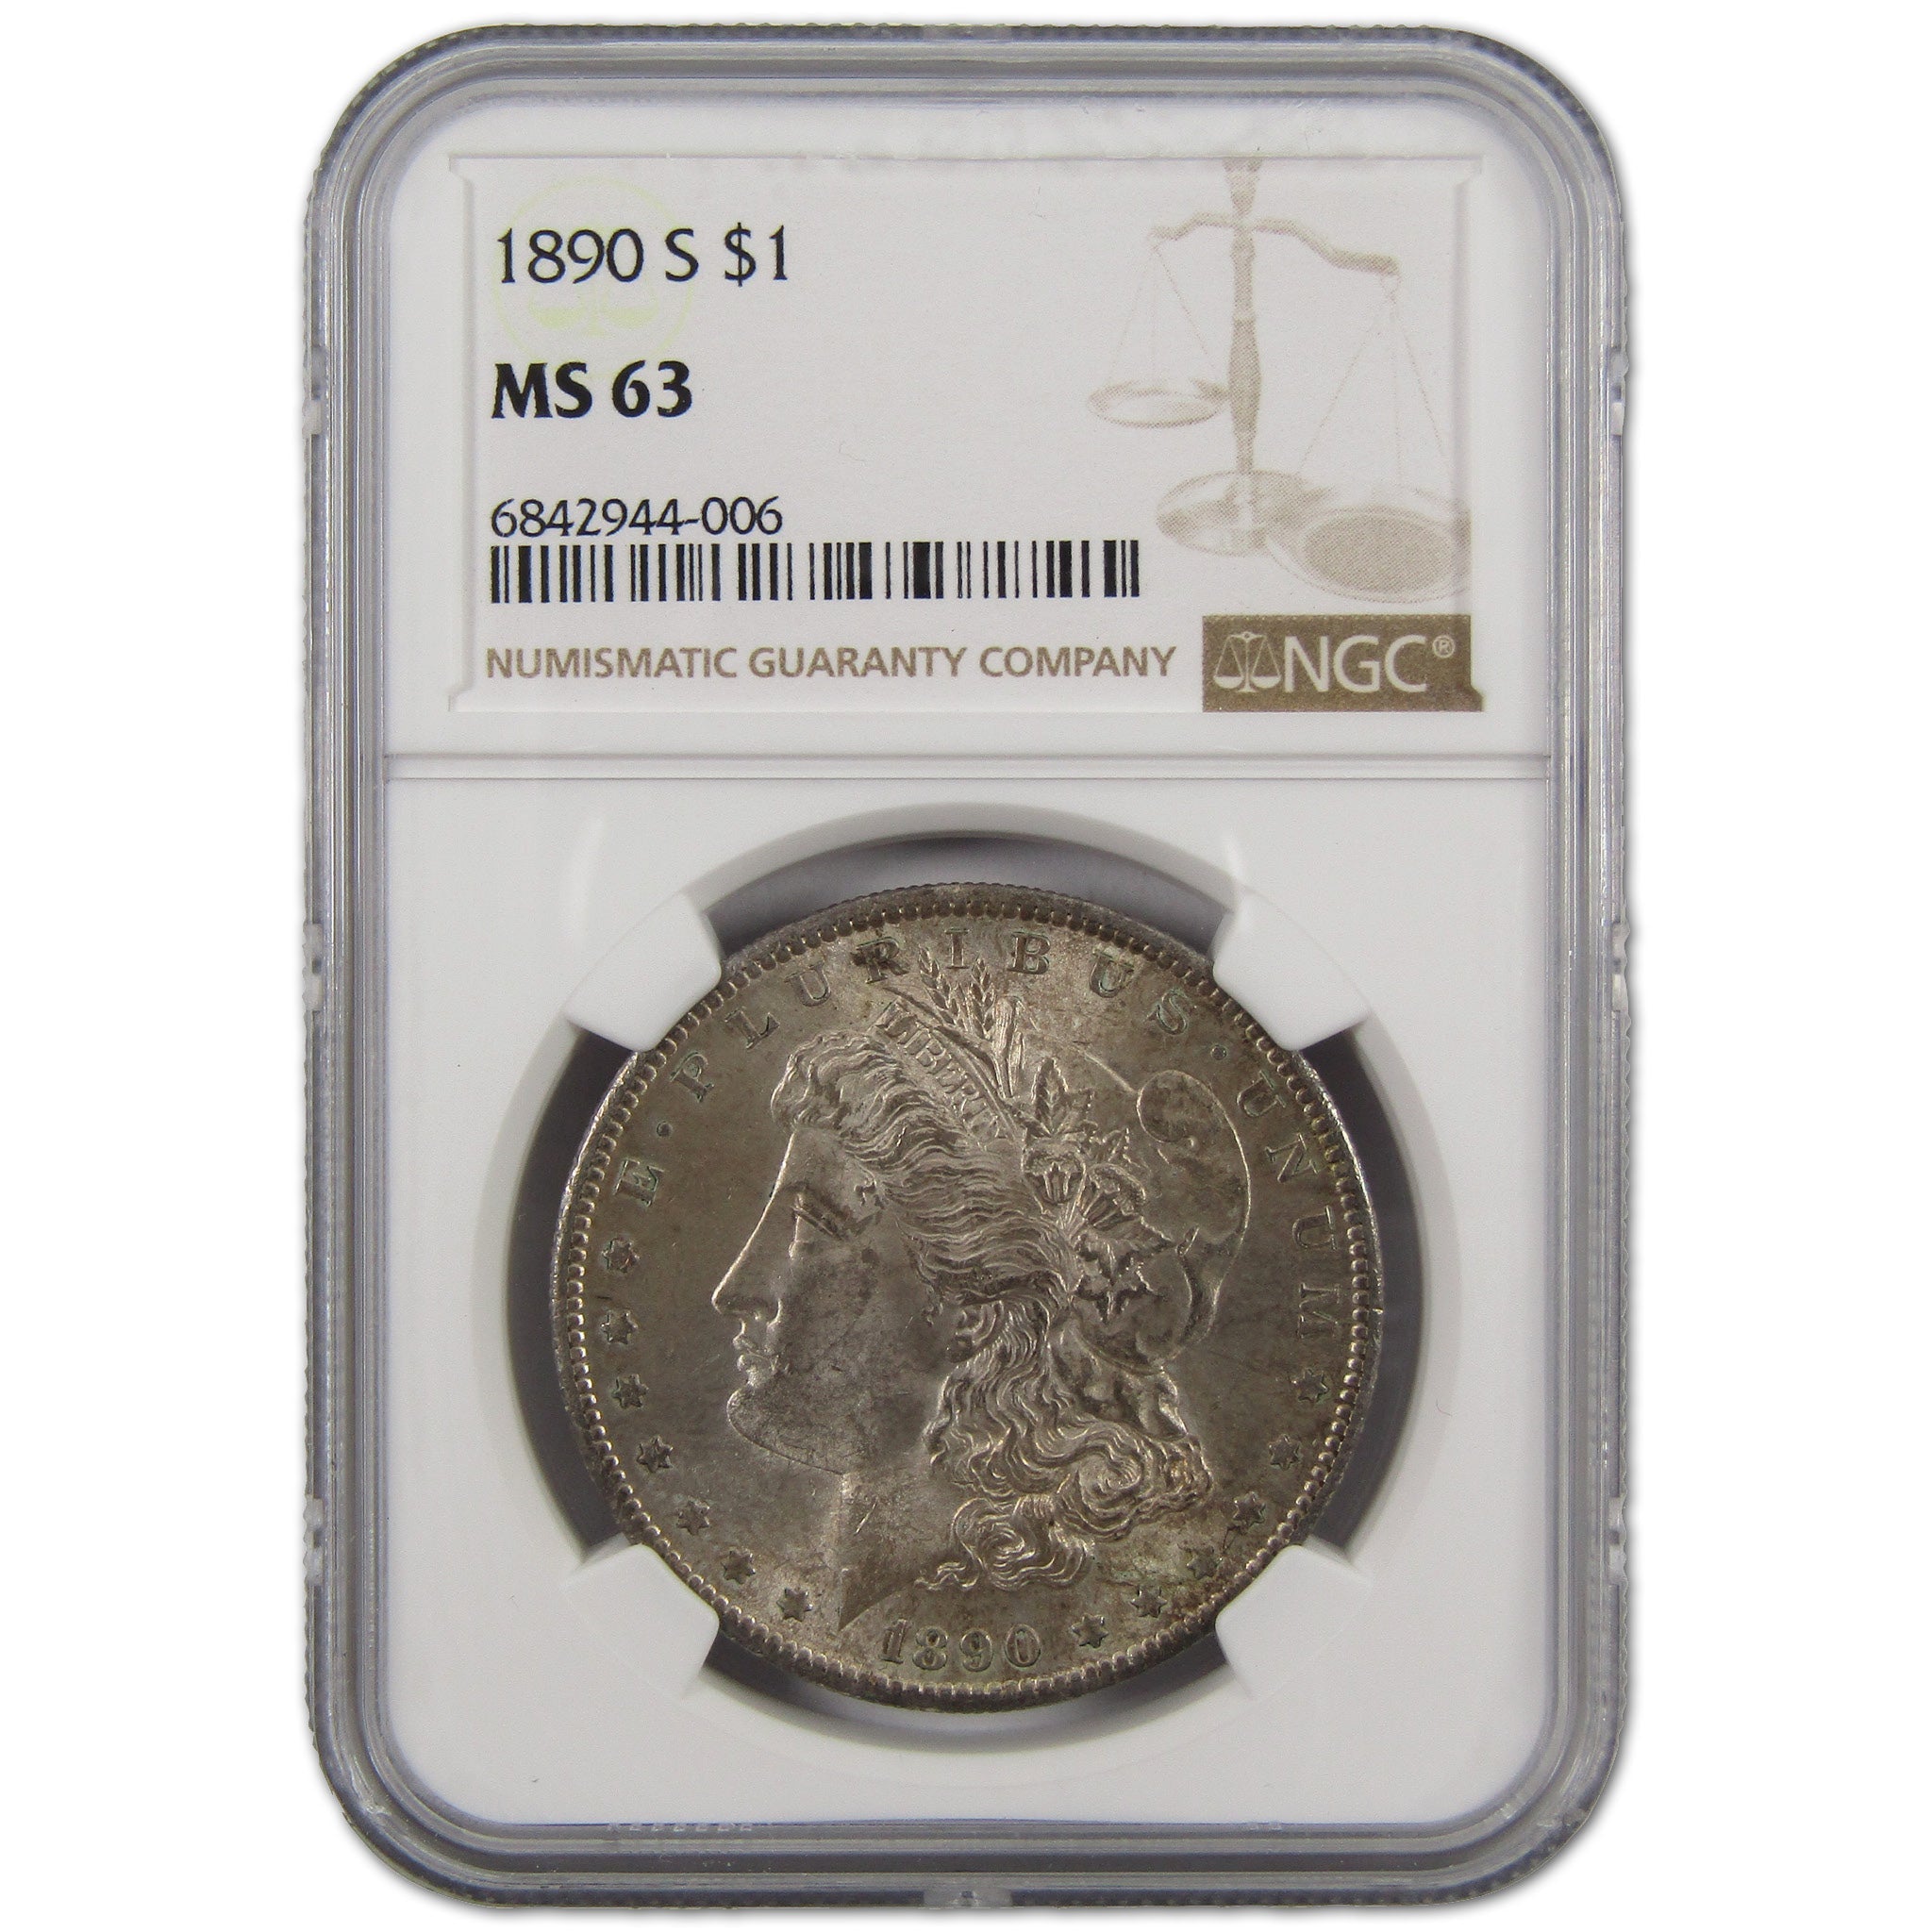 1890 S Morgan Dollar MS 63 NGC Silver $1 Uncirculated Coin SKU:I10891 - Morgan coin - Morgan silver dollar - Morgan silver dollar for sale - Profile Coins &amp; Collectibles